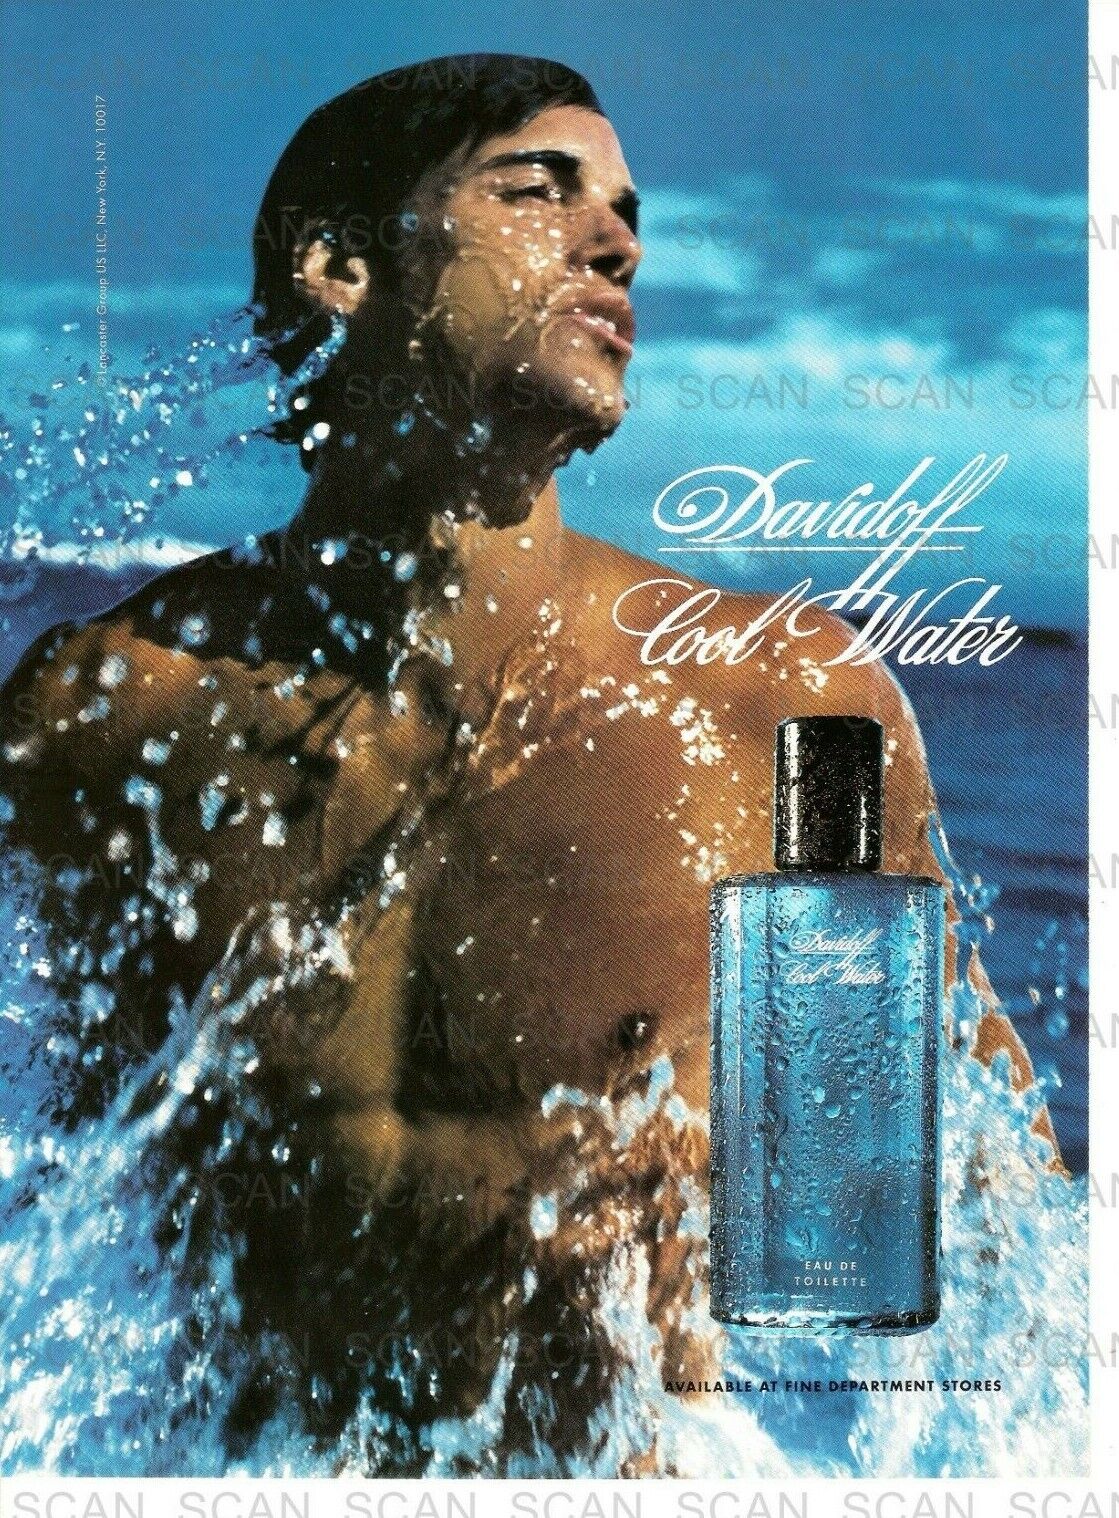 1998 Davidoff 'Cool Water' Men's Cologne  Vintage Magazine Ad  Sexy Guy in Water